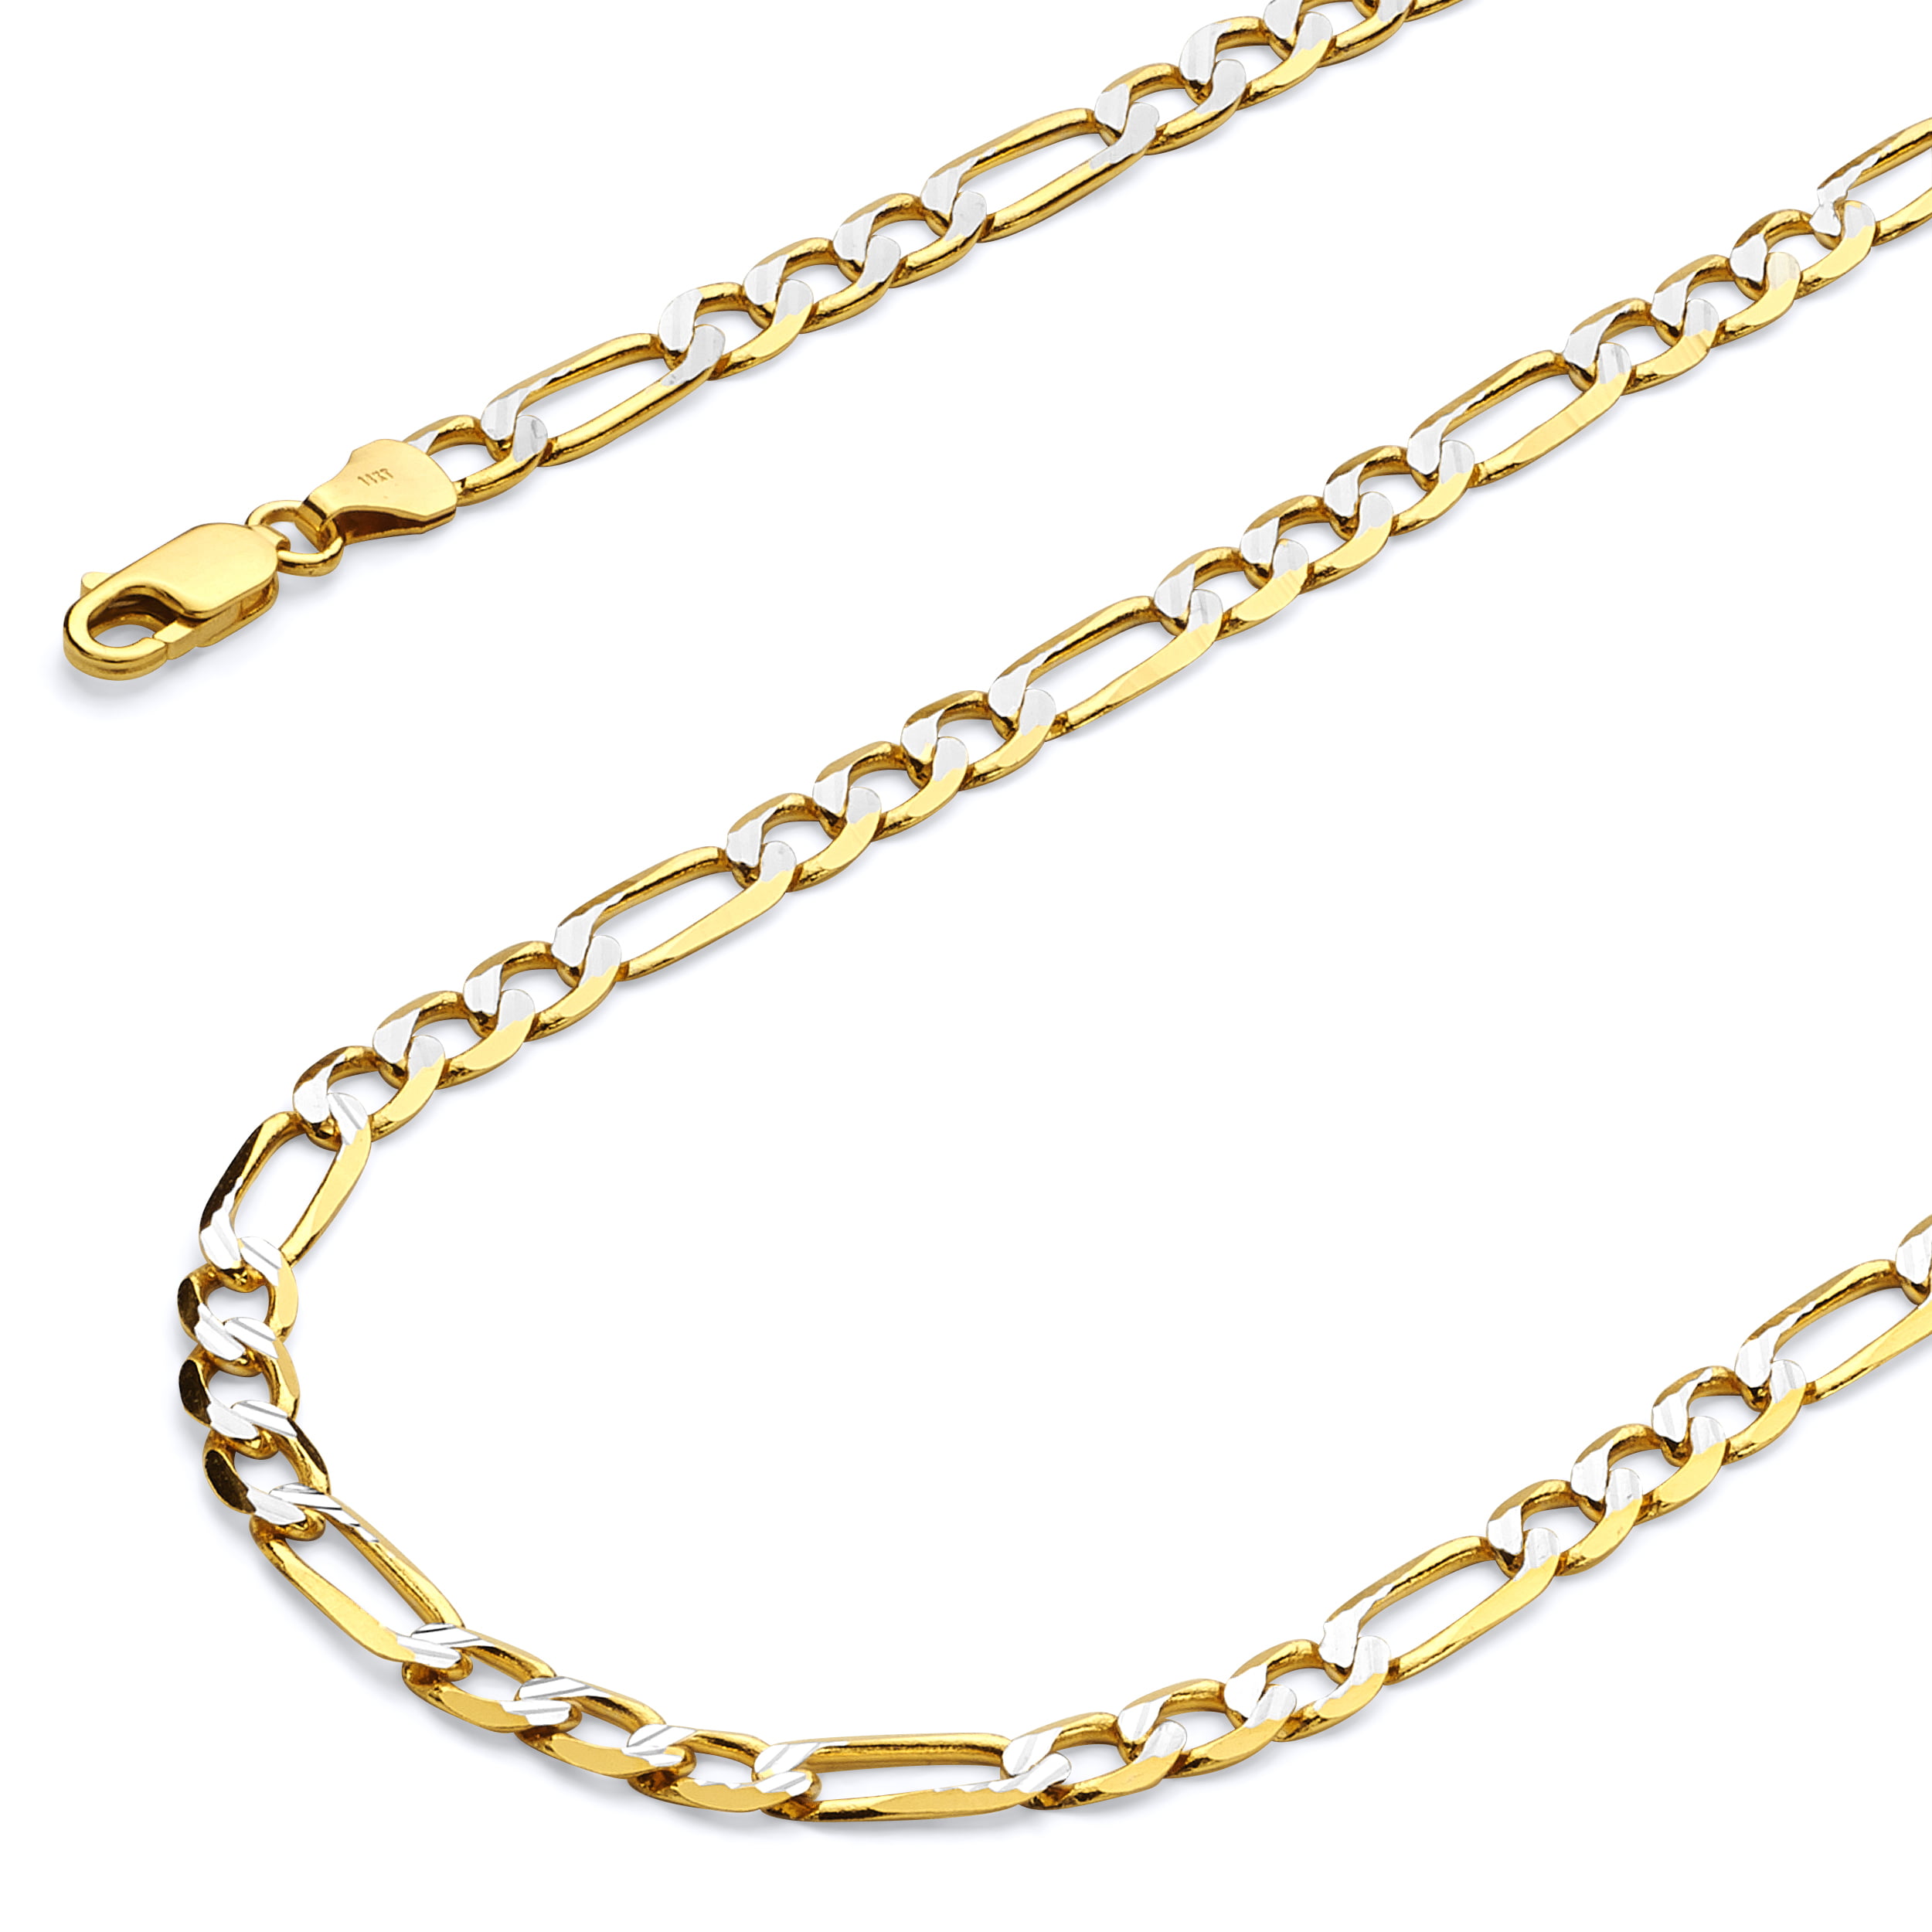 GoldenMine Fine Jewelry Collection 14k Yellow Gold 3mm Fancy Rolo Hollow Necklace with Lobster Claw Clasp